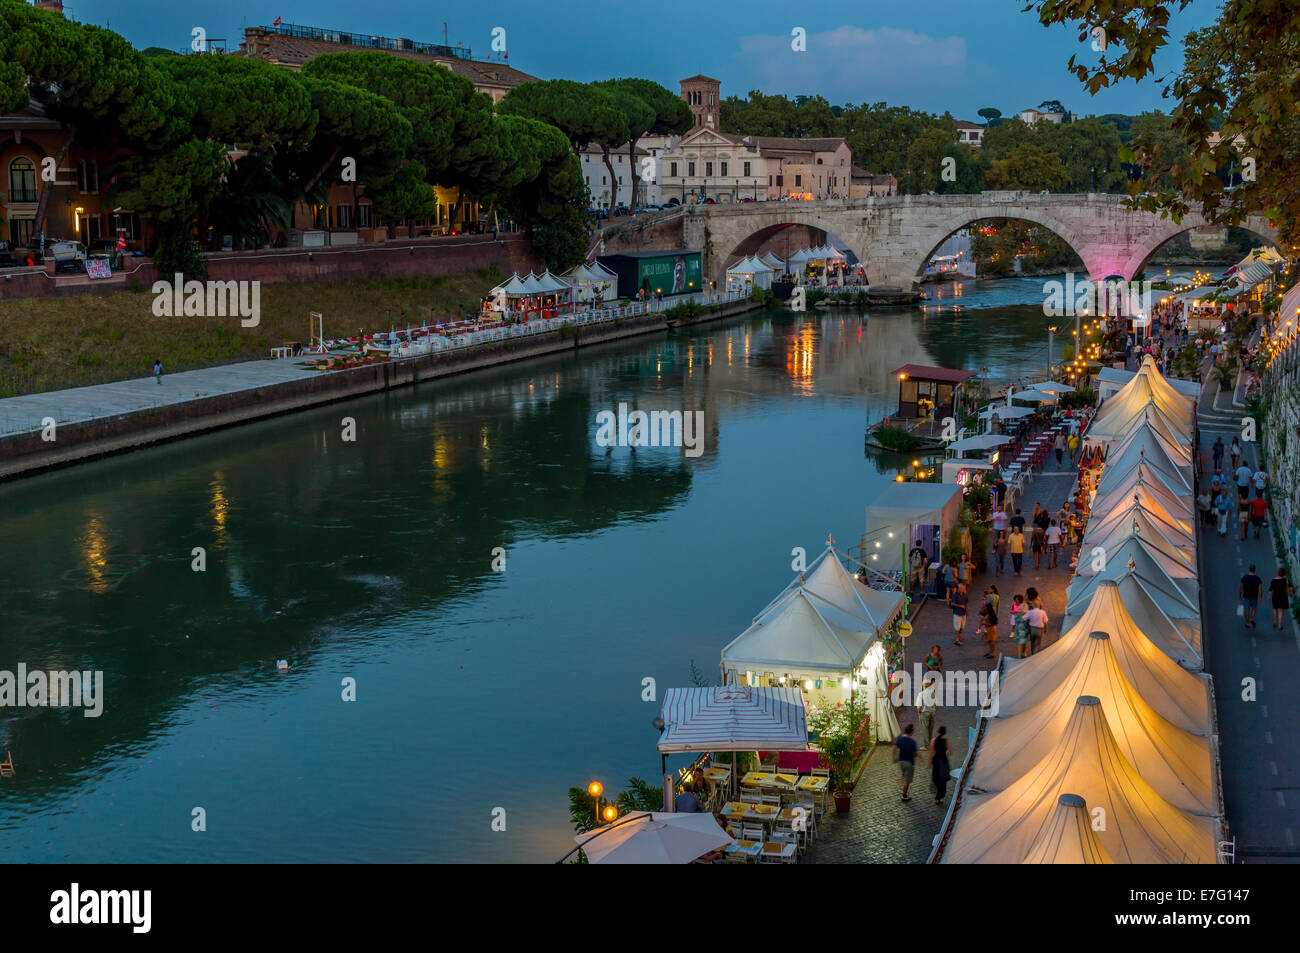 View of the summer market along the Tiber River (Lungo Tevere) and Tiber Island (Isola Tiberina) in Rome Stock Photo